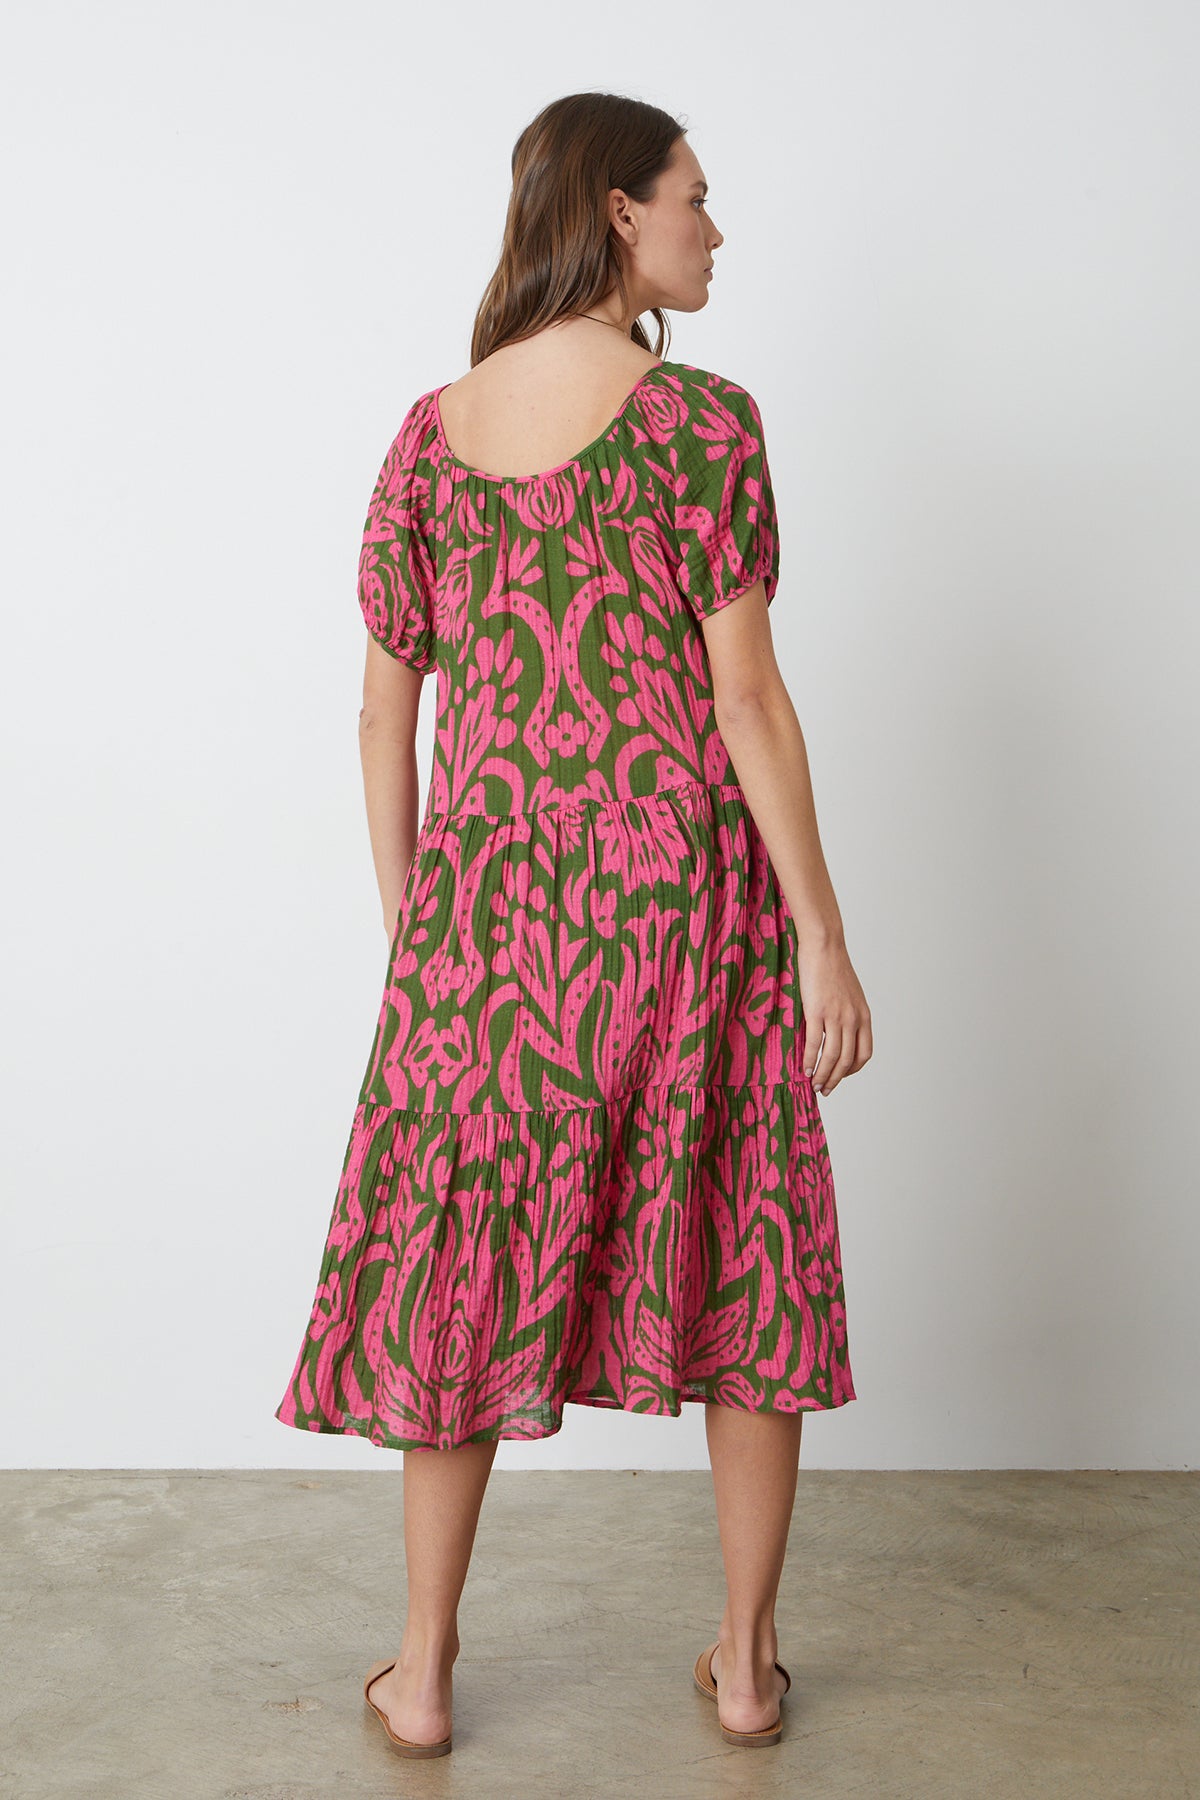 The back view of a woman wearing the Velvet by Graham & Spencer MADILYN PRINTED COTTON GAUZE MIDI DRESS in pink and green.-26342678397121